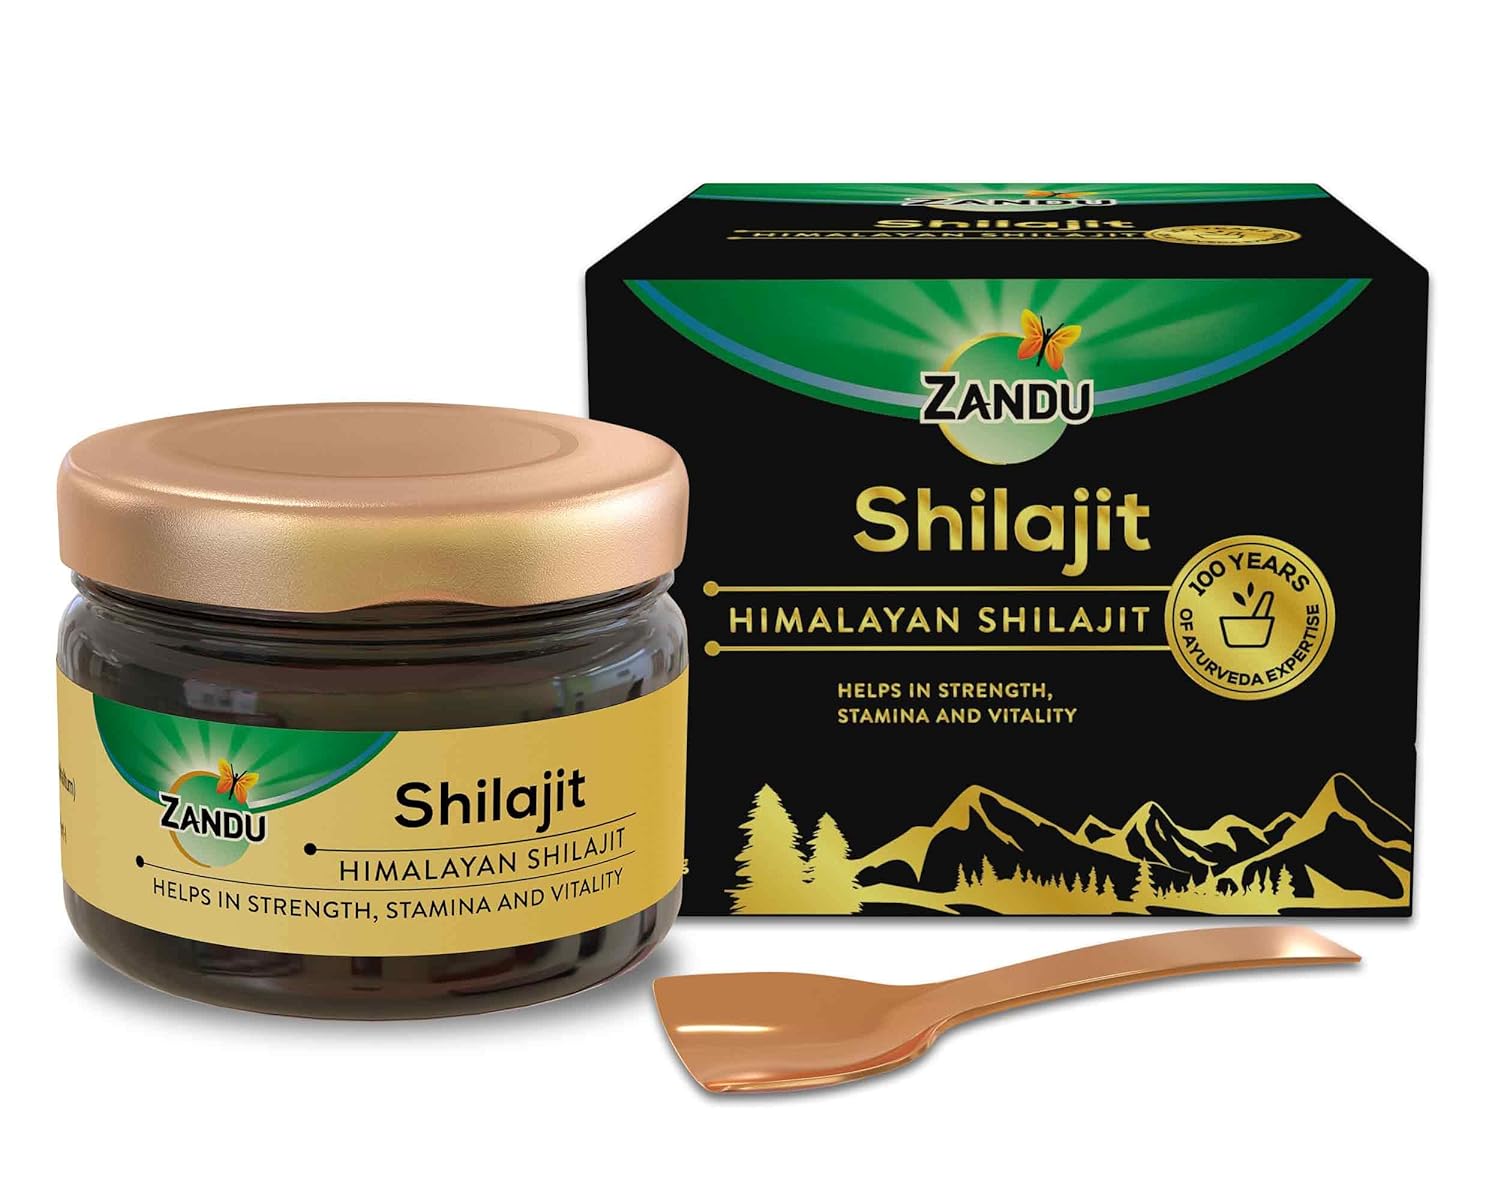 Top Powerful Shilajit Brands In World For Energy,Stamina & Sexual Performance